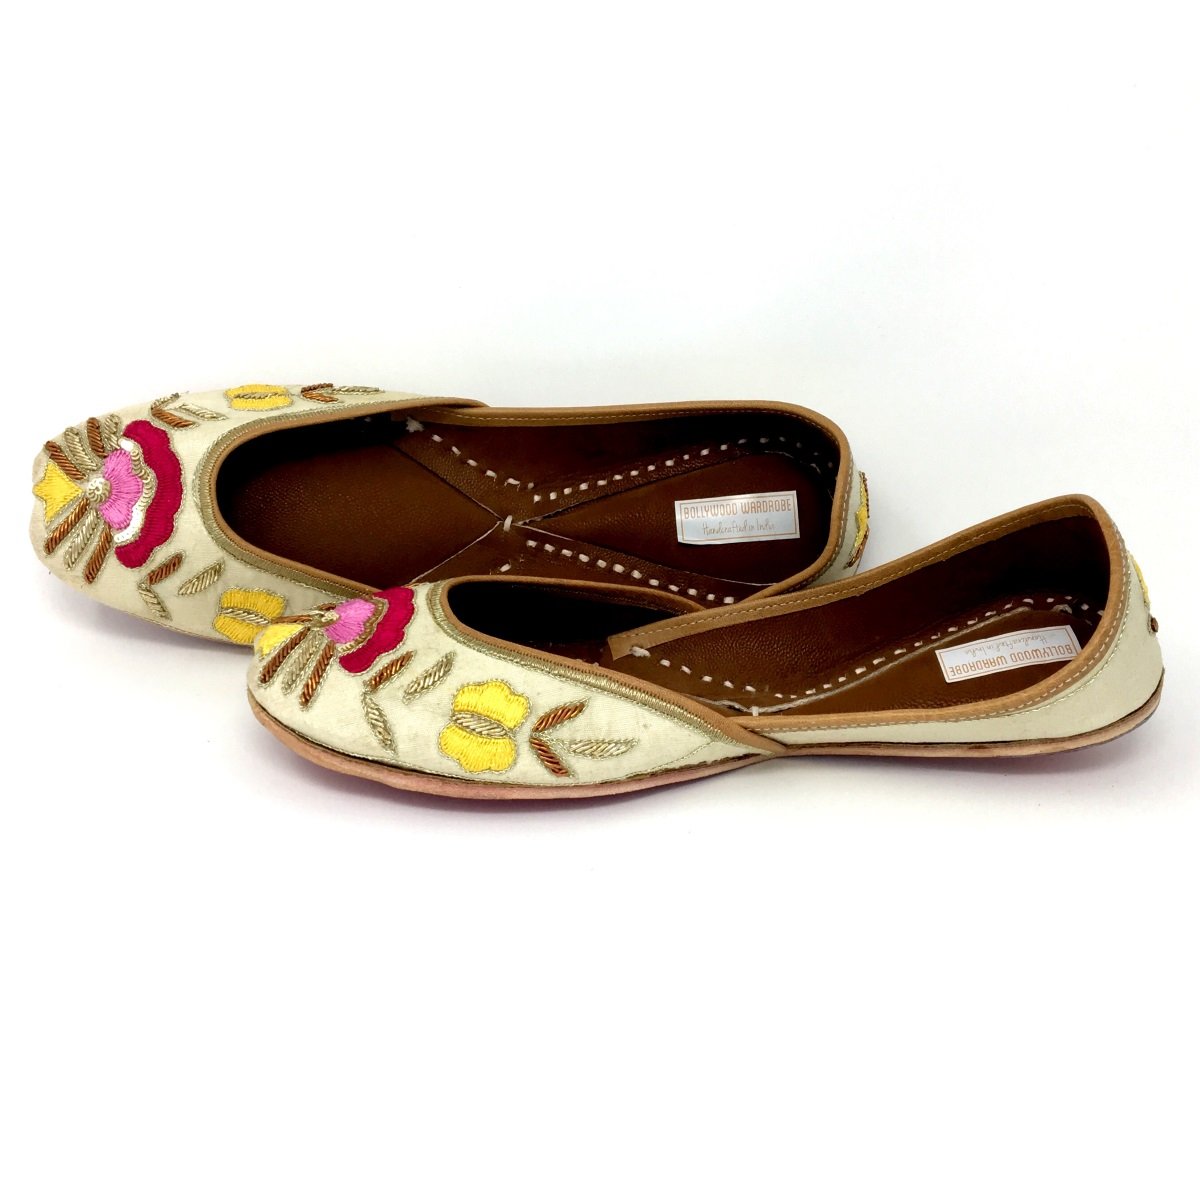 Cream Color Handicraft Punjabi Jutti / Shoes With Colorful Floral Embroidery